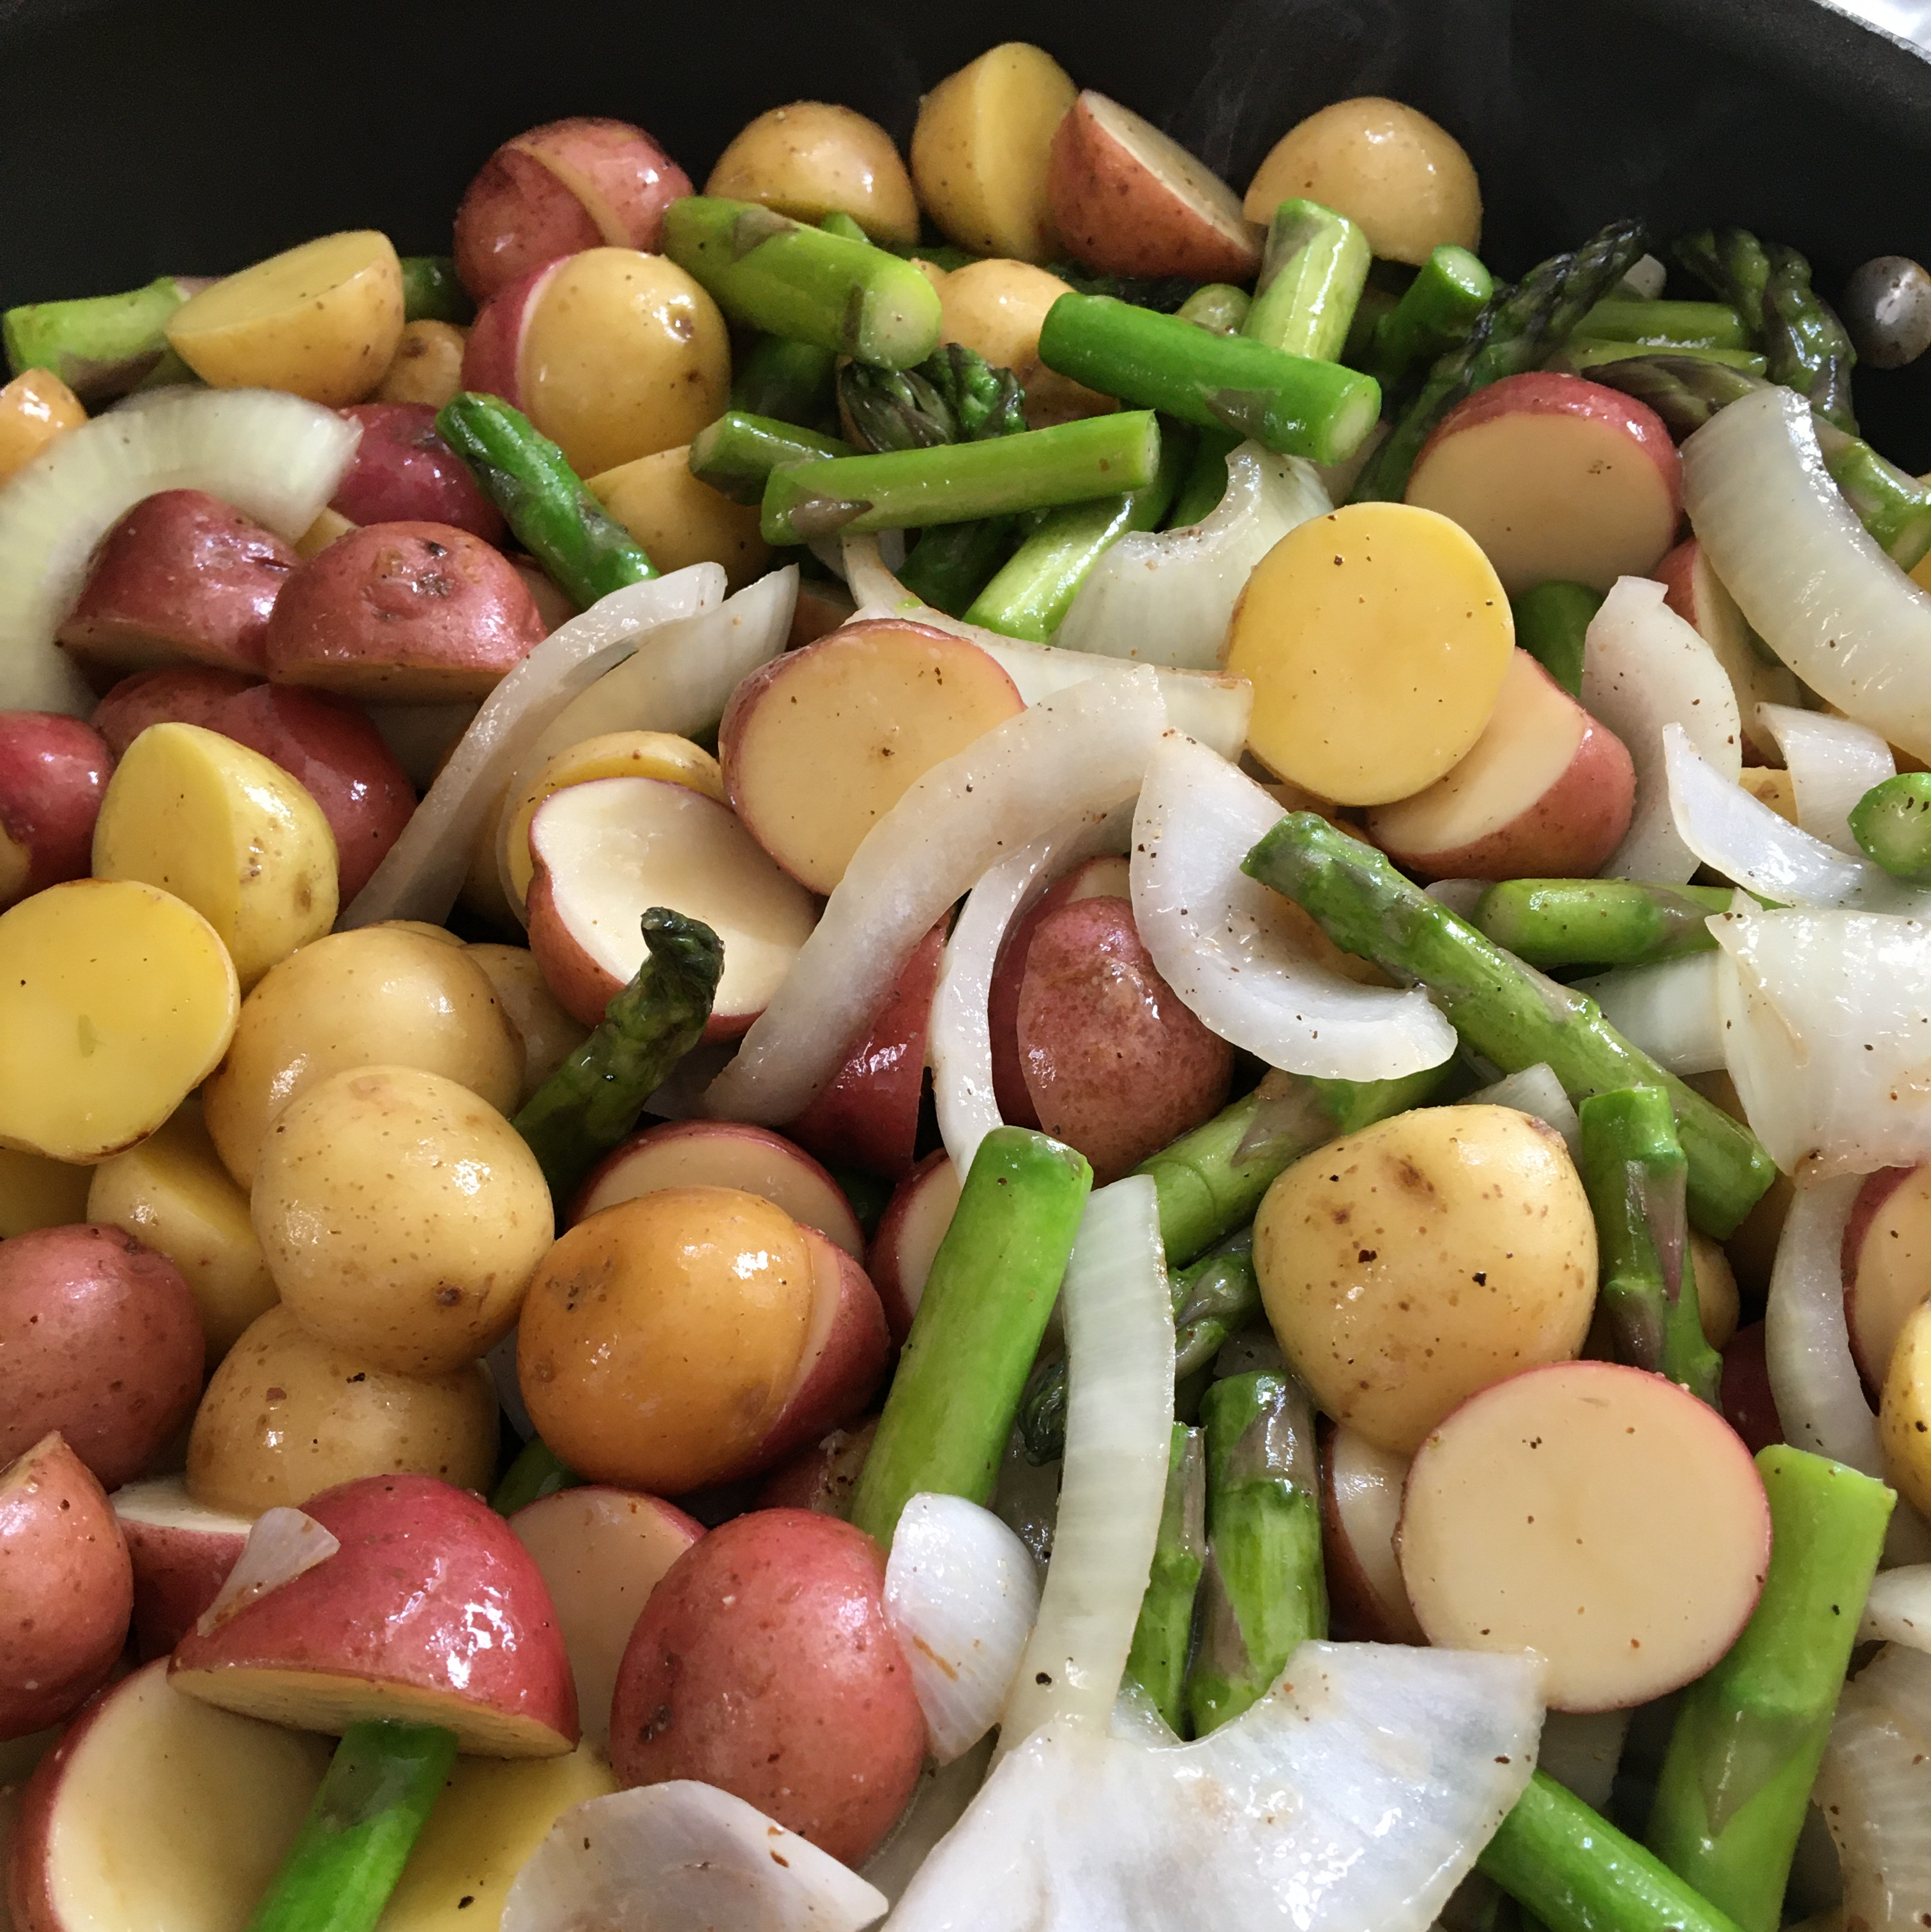 Oven Roasted Red Potatoes and Asparagus Michael Radford